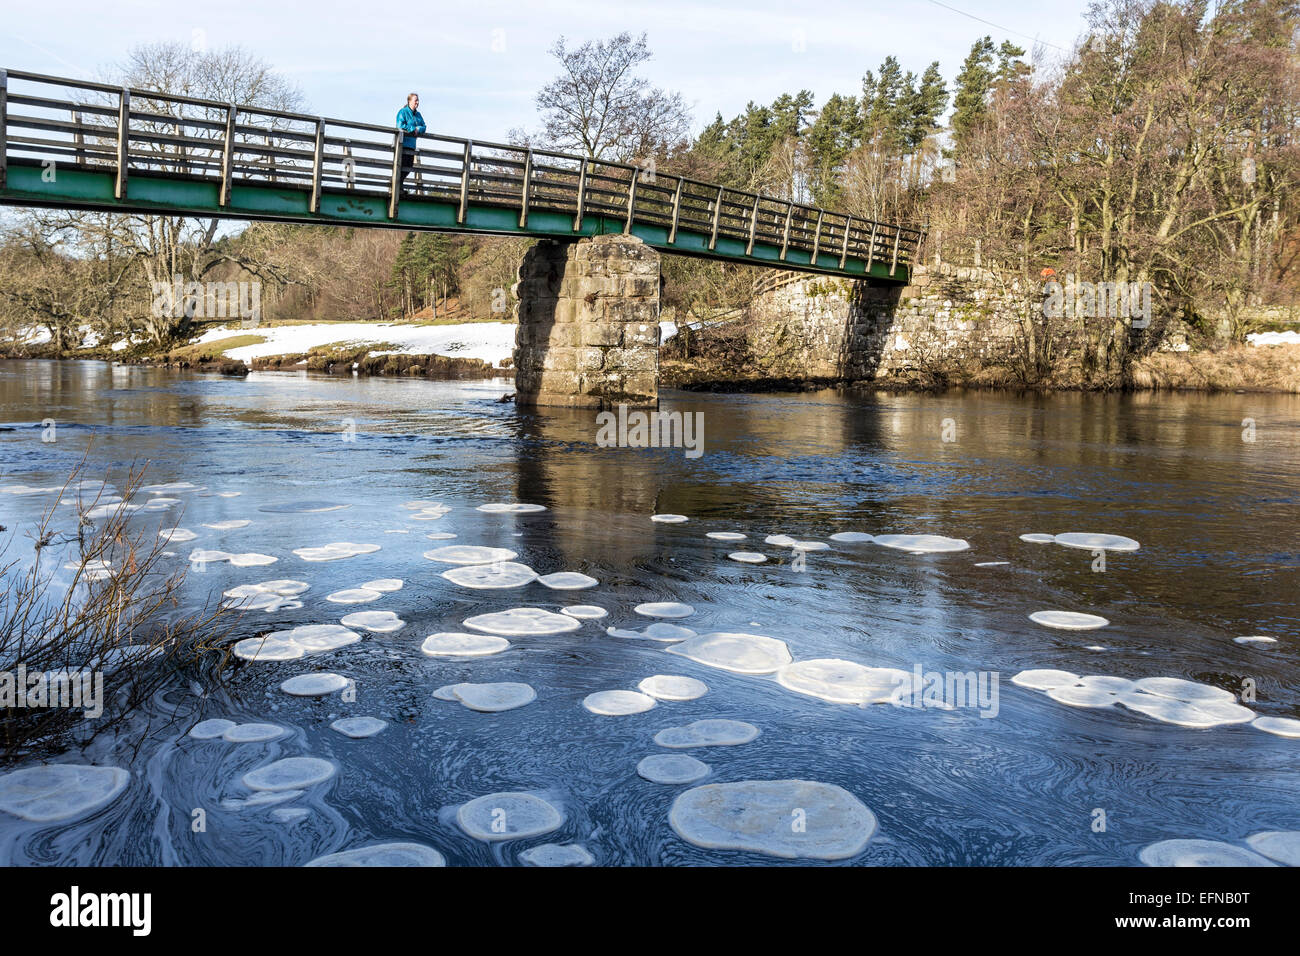 Holwick Head Bridge, Upper Teesdale, County Durham. UK Weather. Ice pancakes forming on the River Tees due to the continuing cold weather.  These frozen ice discs only form when temperatures dip well below freezing overnight and then as they thaw during the day they bump into each other and create rounded plates. Credit:  David Forster/Alamy Live News Stock Photo